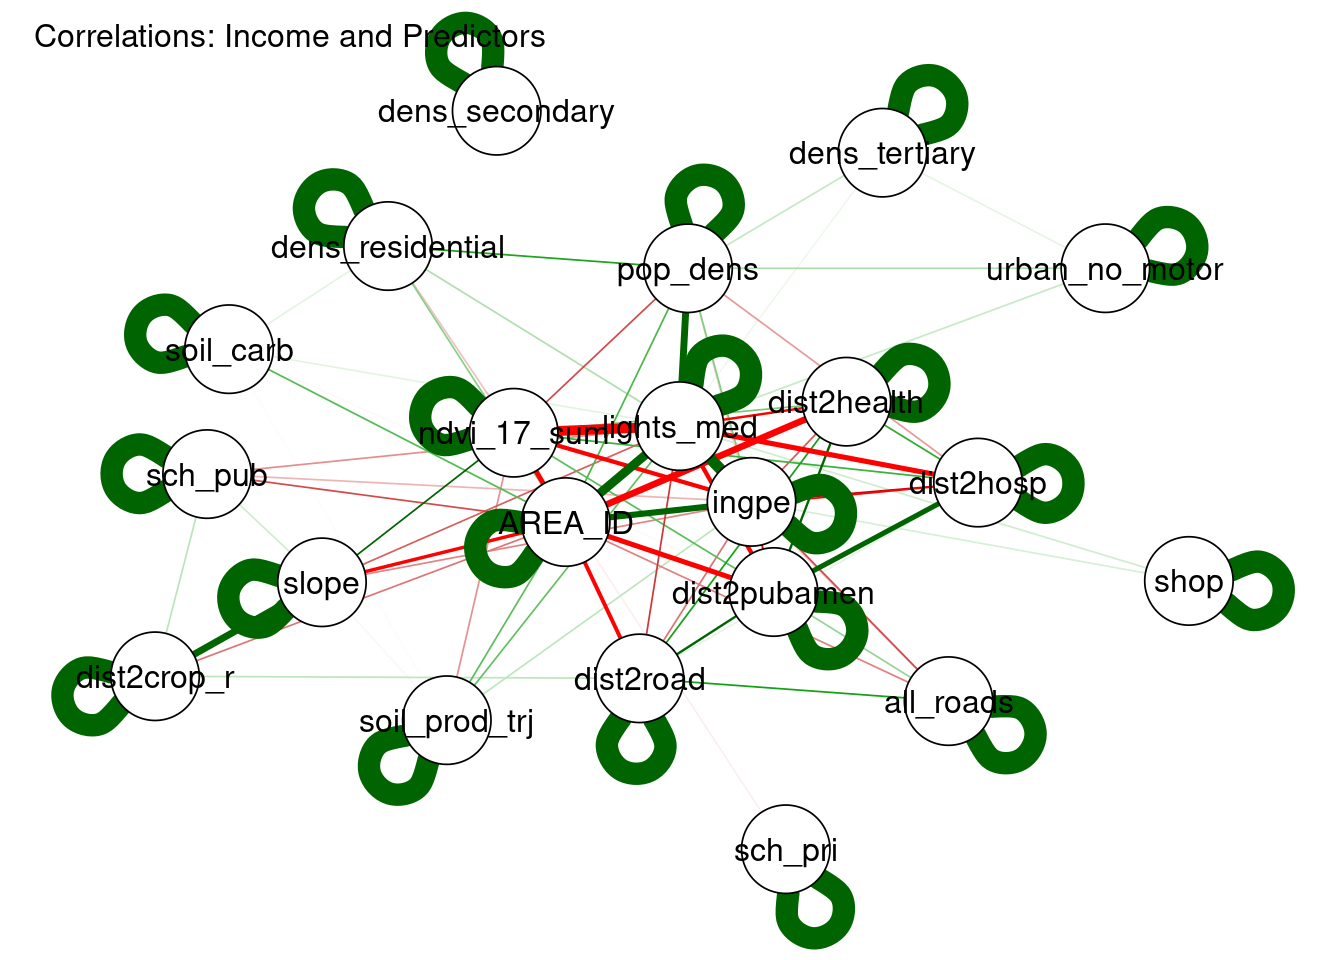 Correlogram of Income (ingpe) with Candidate Covariates